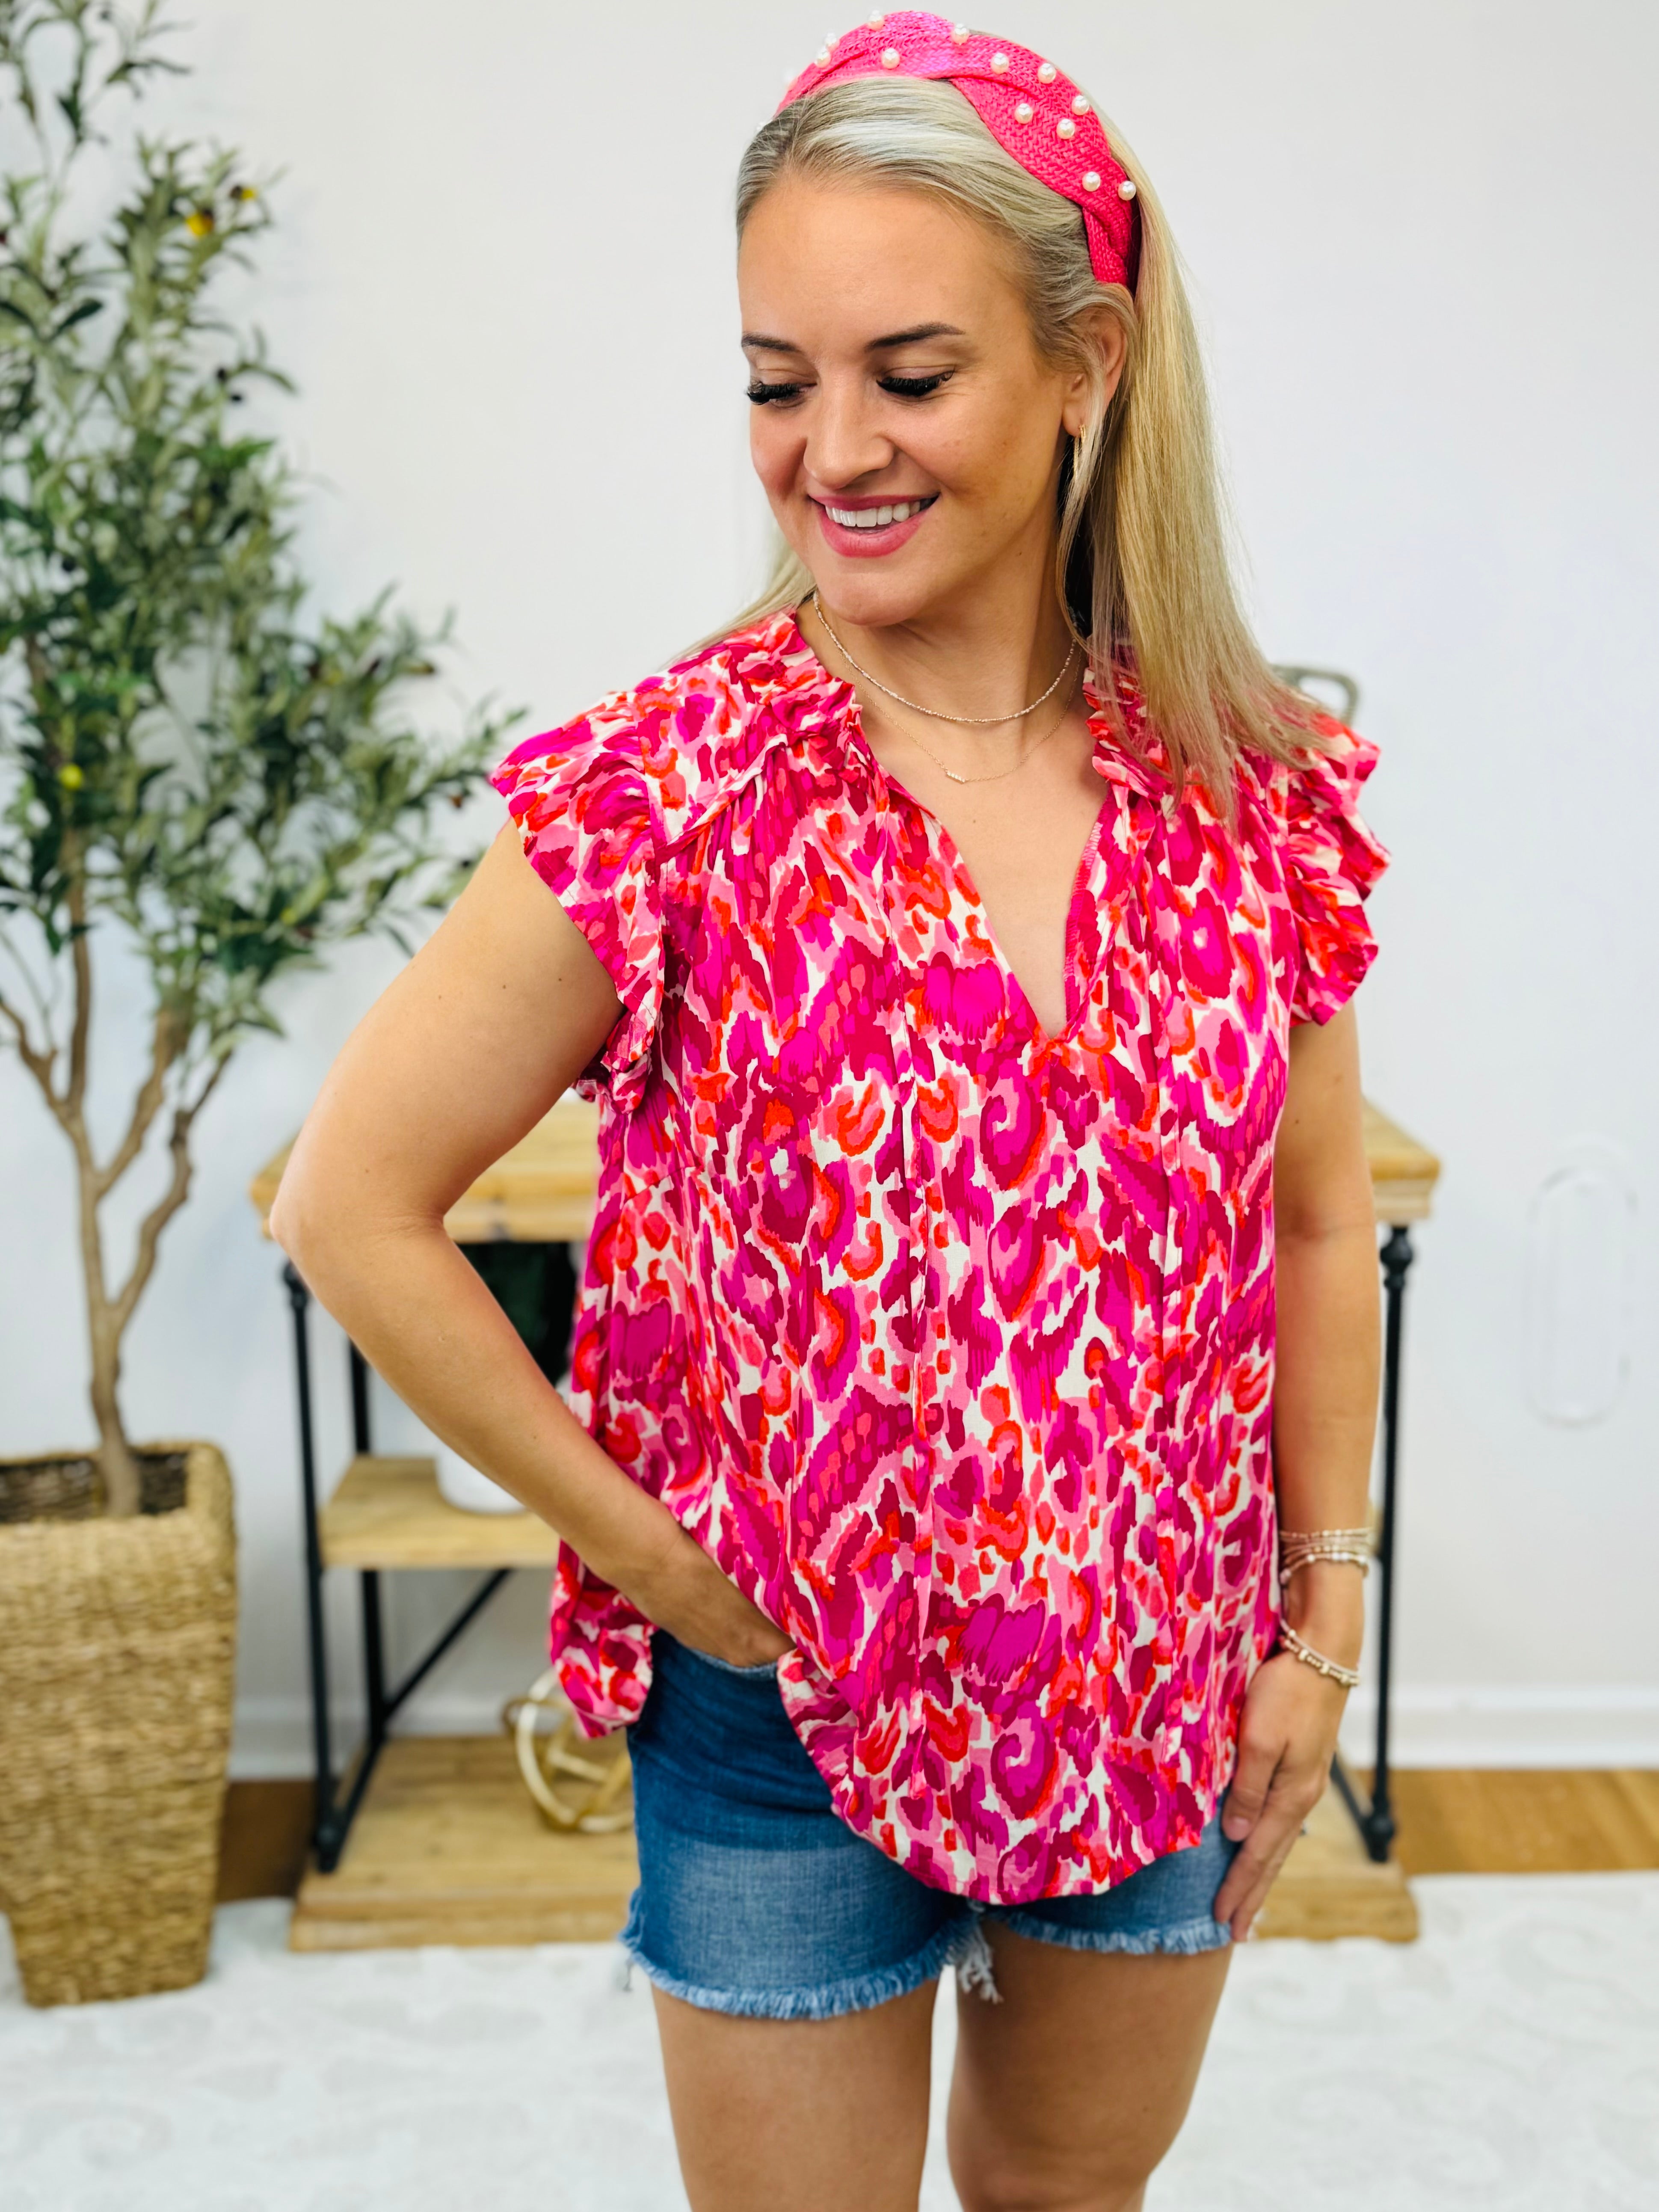 FINAL SALE - Sunkissed Top-120 Sleeveless Tops-The Lovely Closet-The Lovely Closet, Women's Fashion Boutique in Alexandria, KY